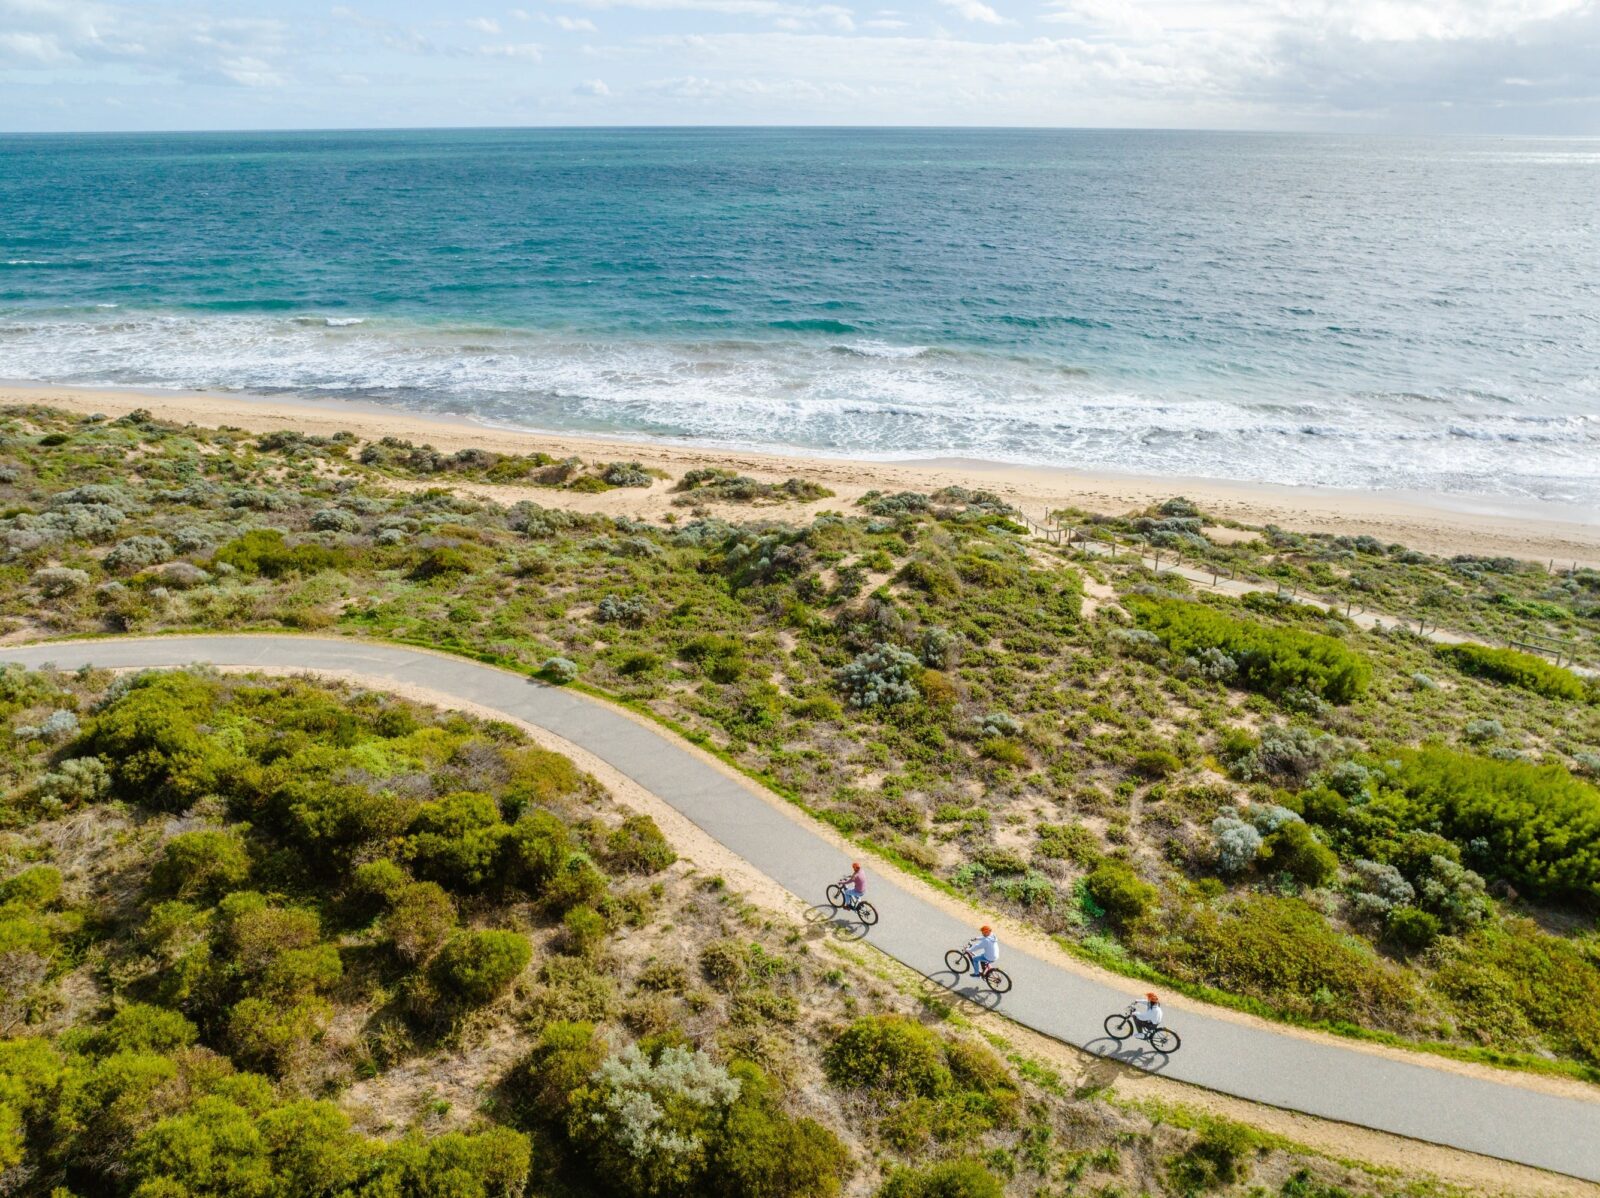 Connect with nature as you cycle along our beautiful coastal paths